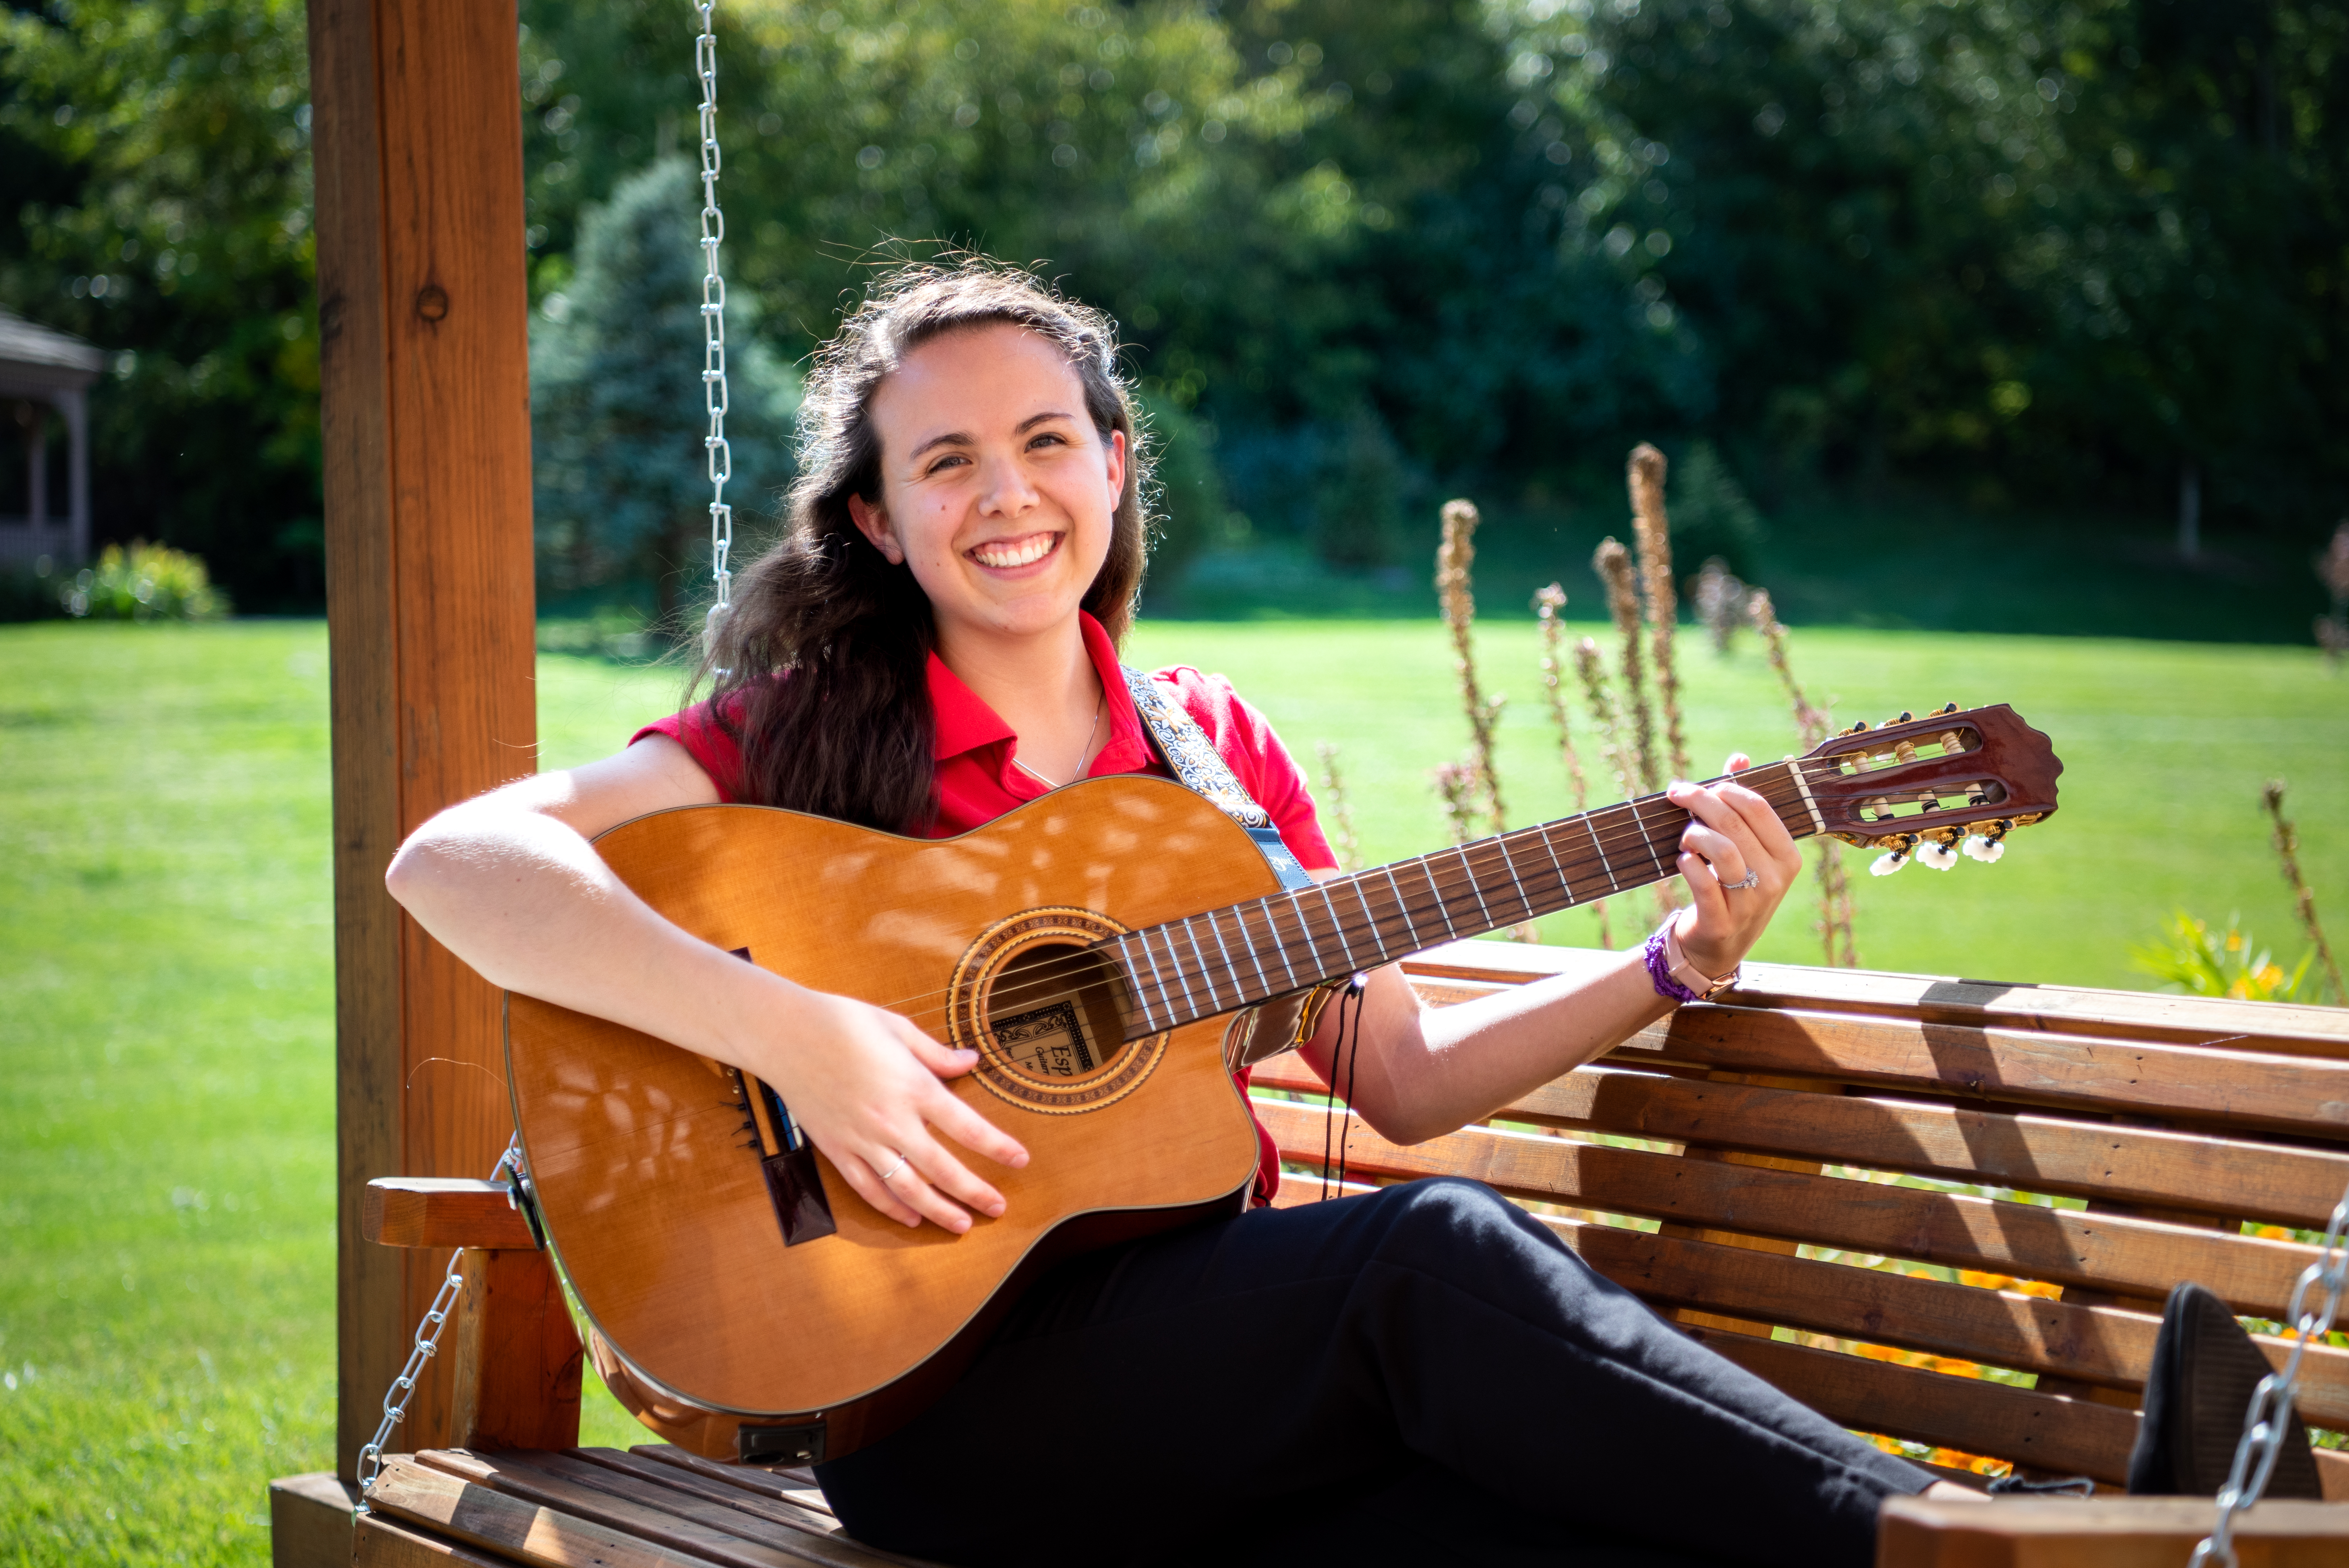 Illinois State University music therapy student Noelle Ortega playing guitar on a bench